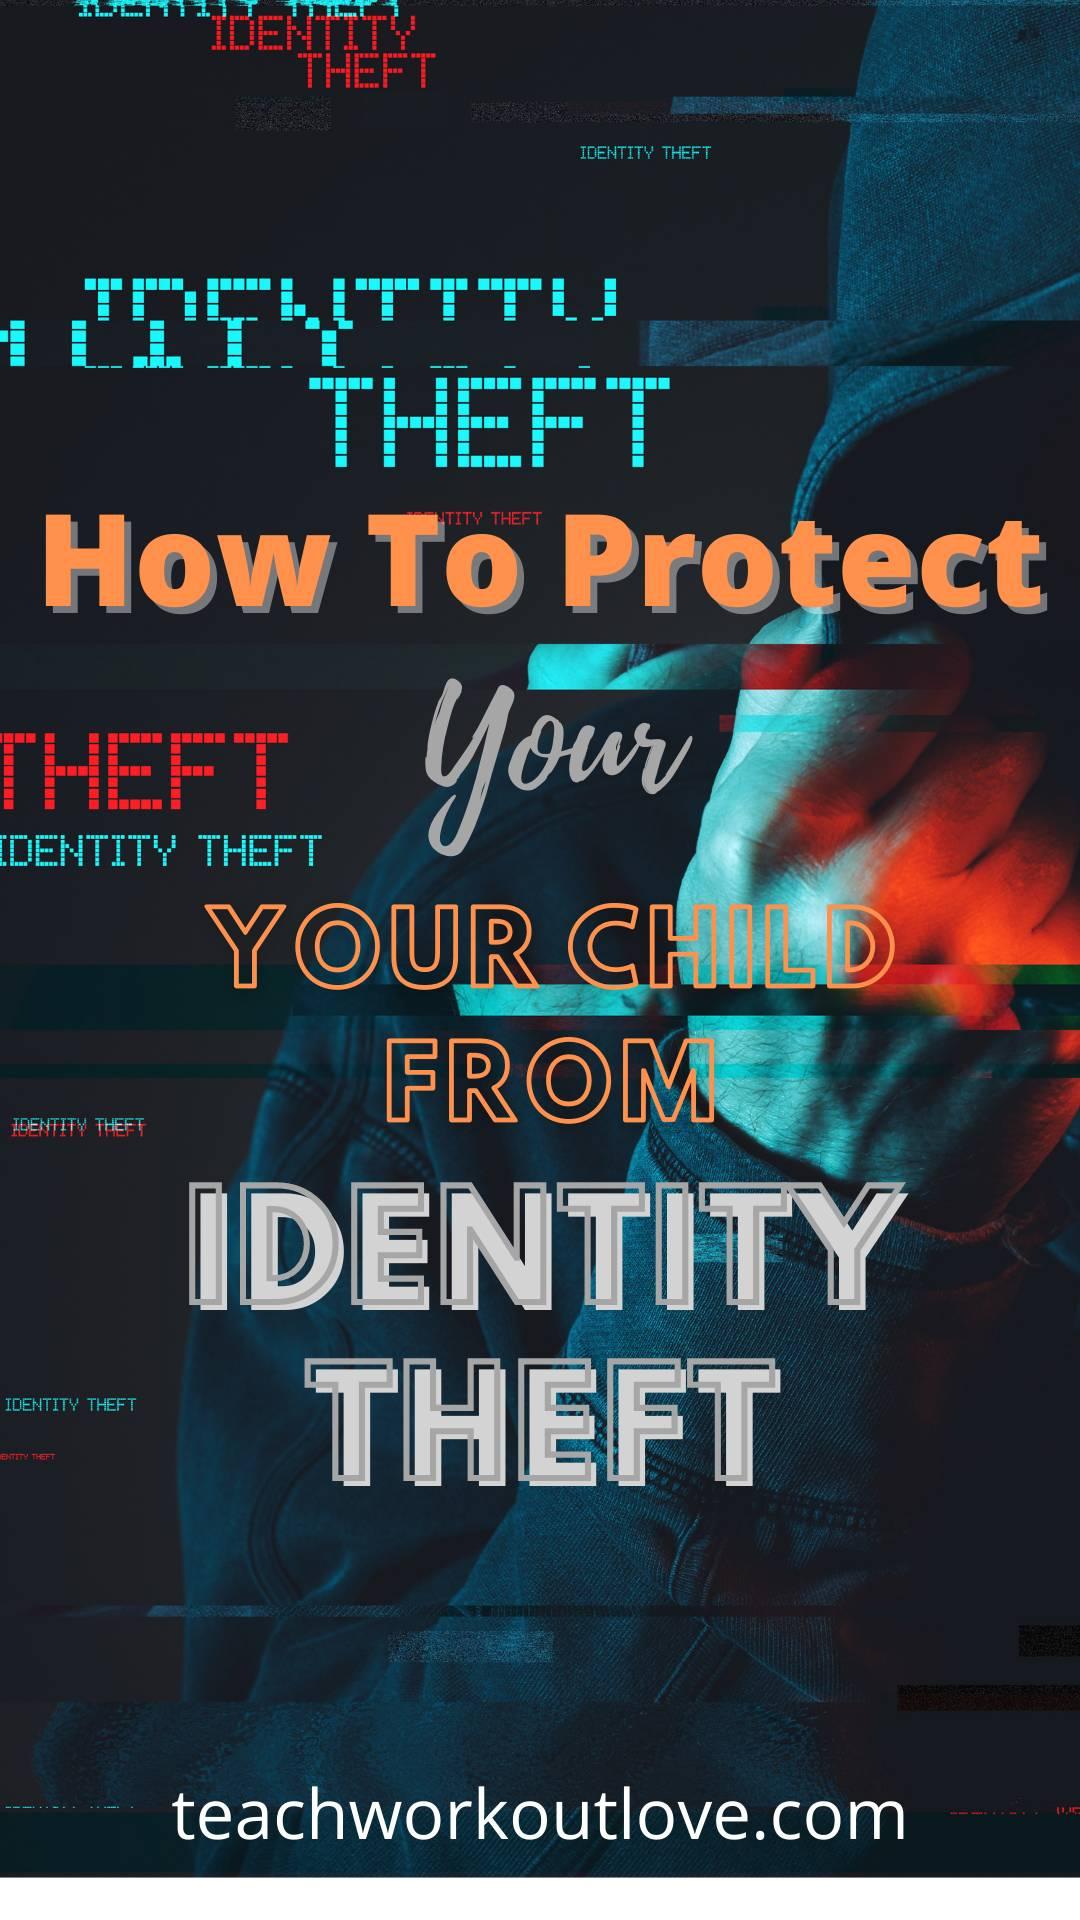 How To Protect Your Child From Identity Theft